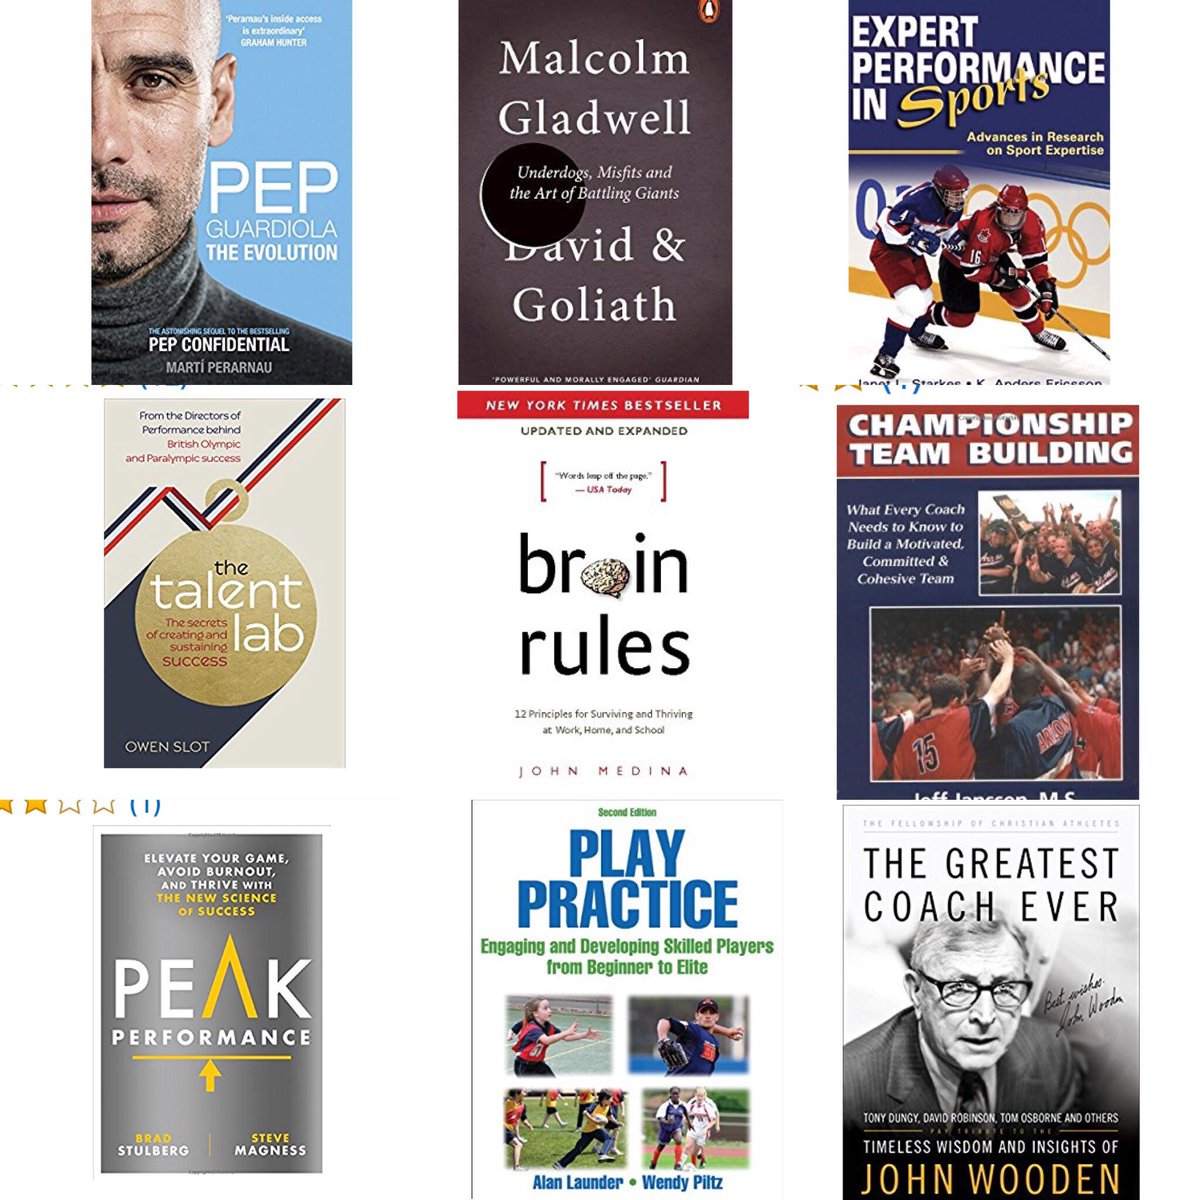 Just a taste of some of the reading recommendations @ #GAINX hosted by @coachgambetta #ContinuousLearning #GettingBetterAtGettingBetter